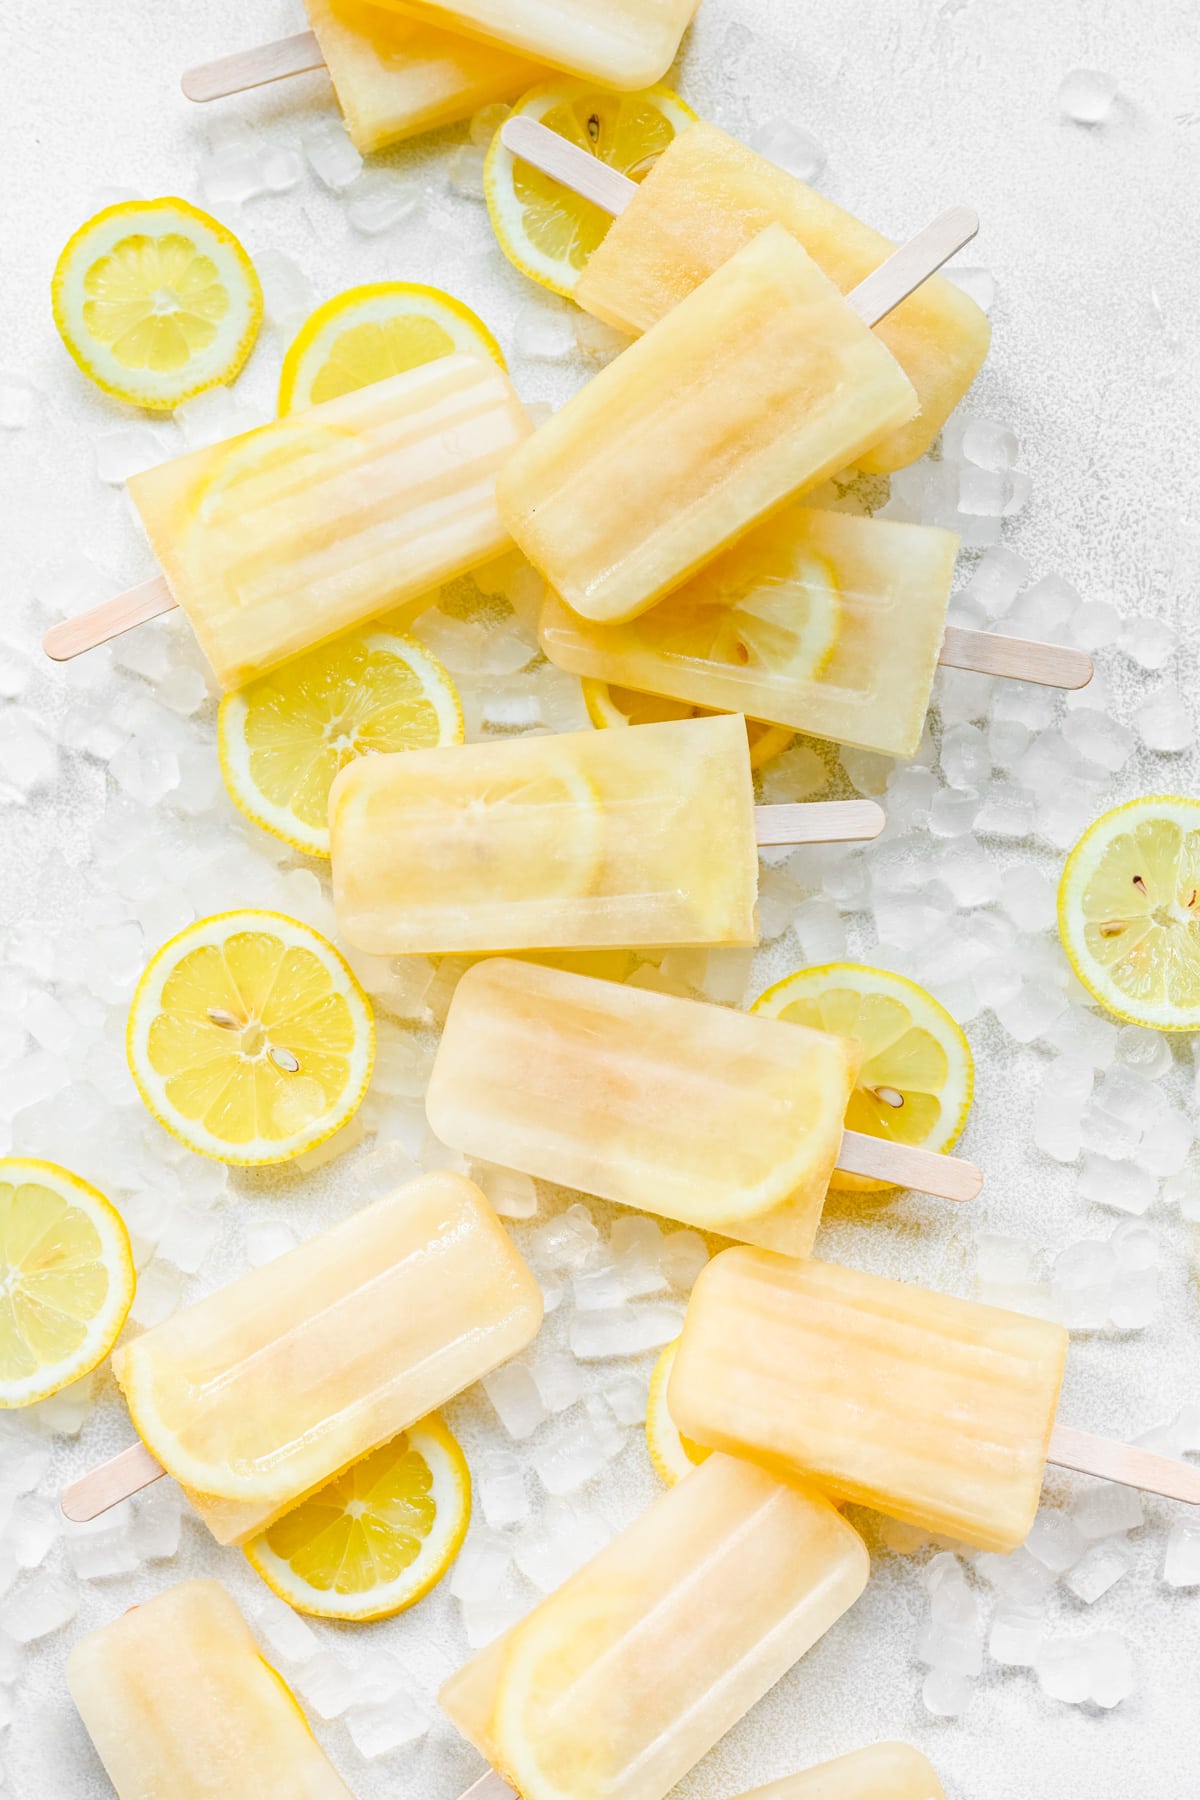 Finished lemon popsicles on top of ice and lemon slices.